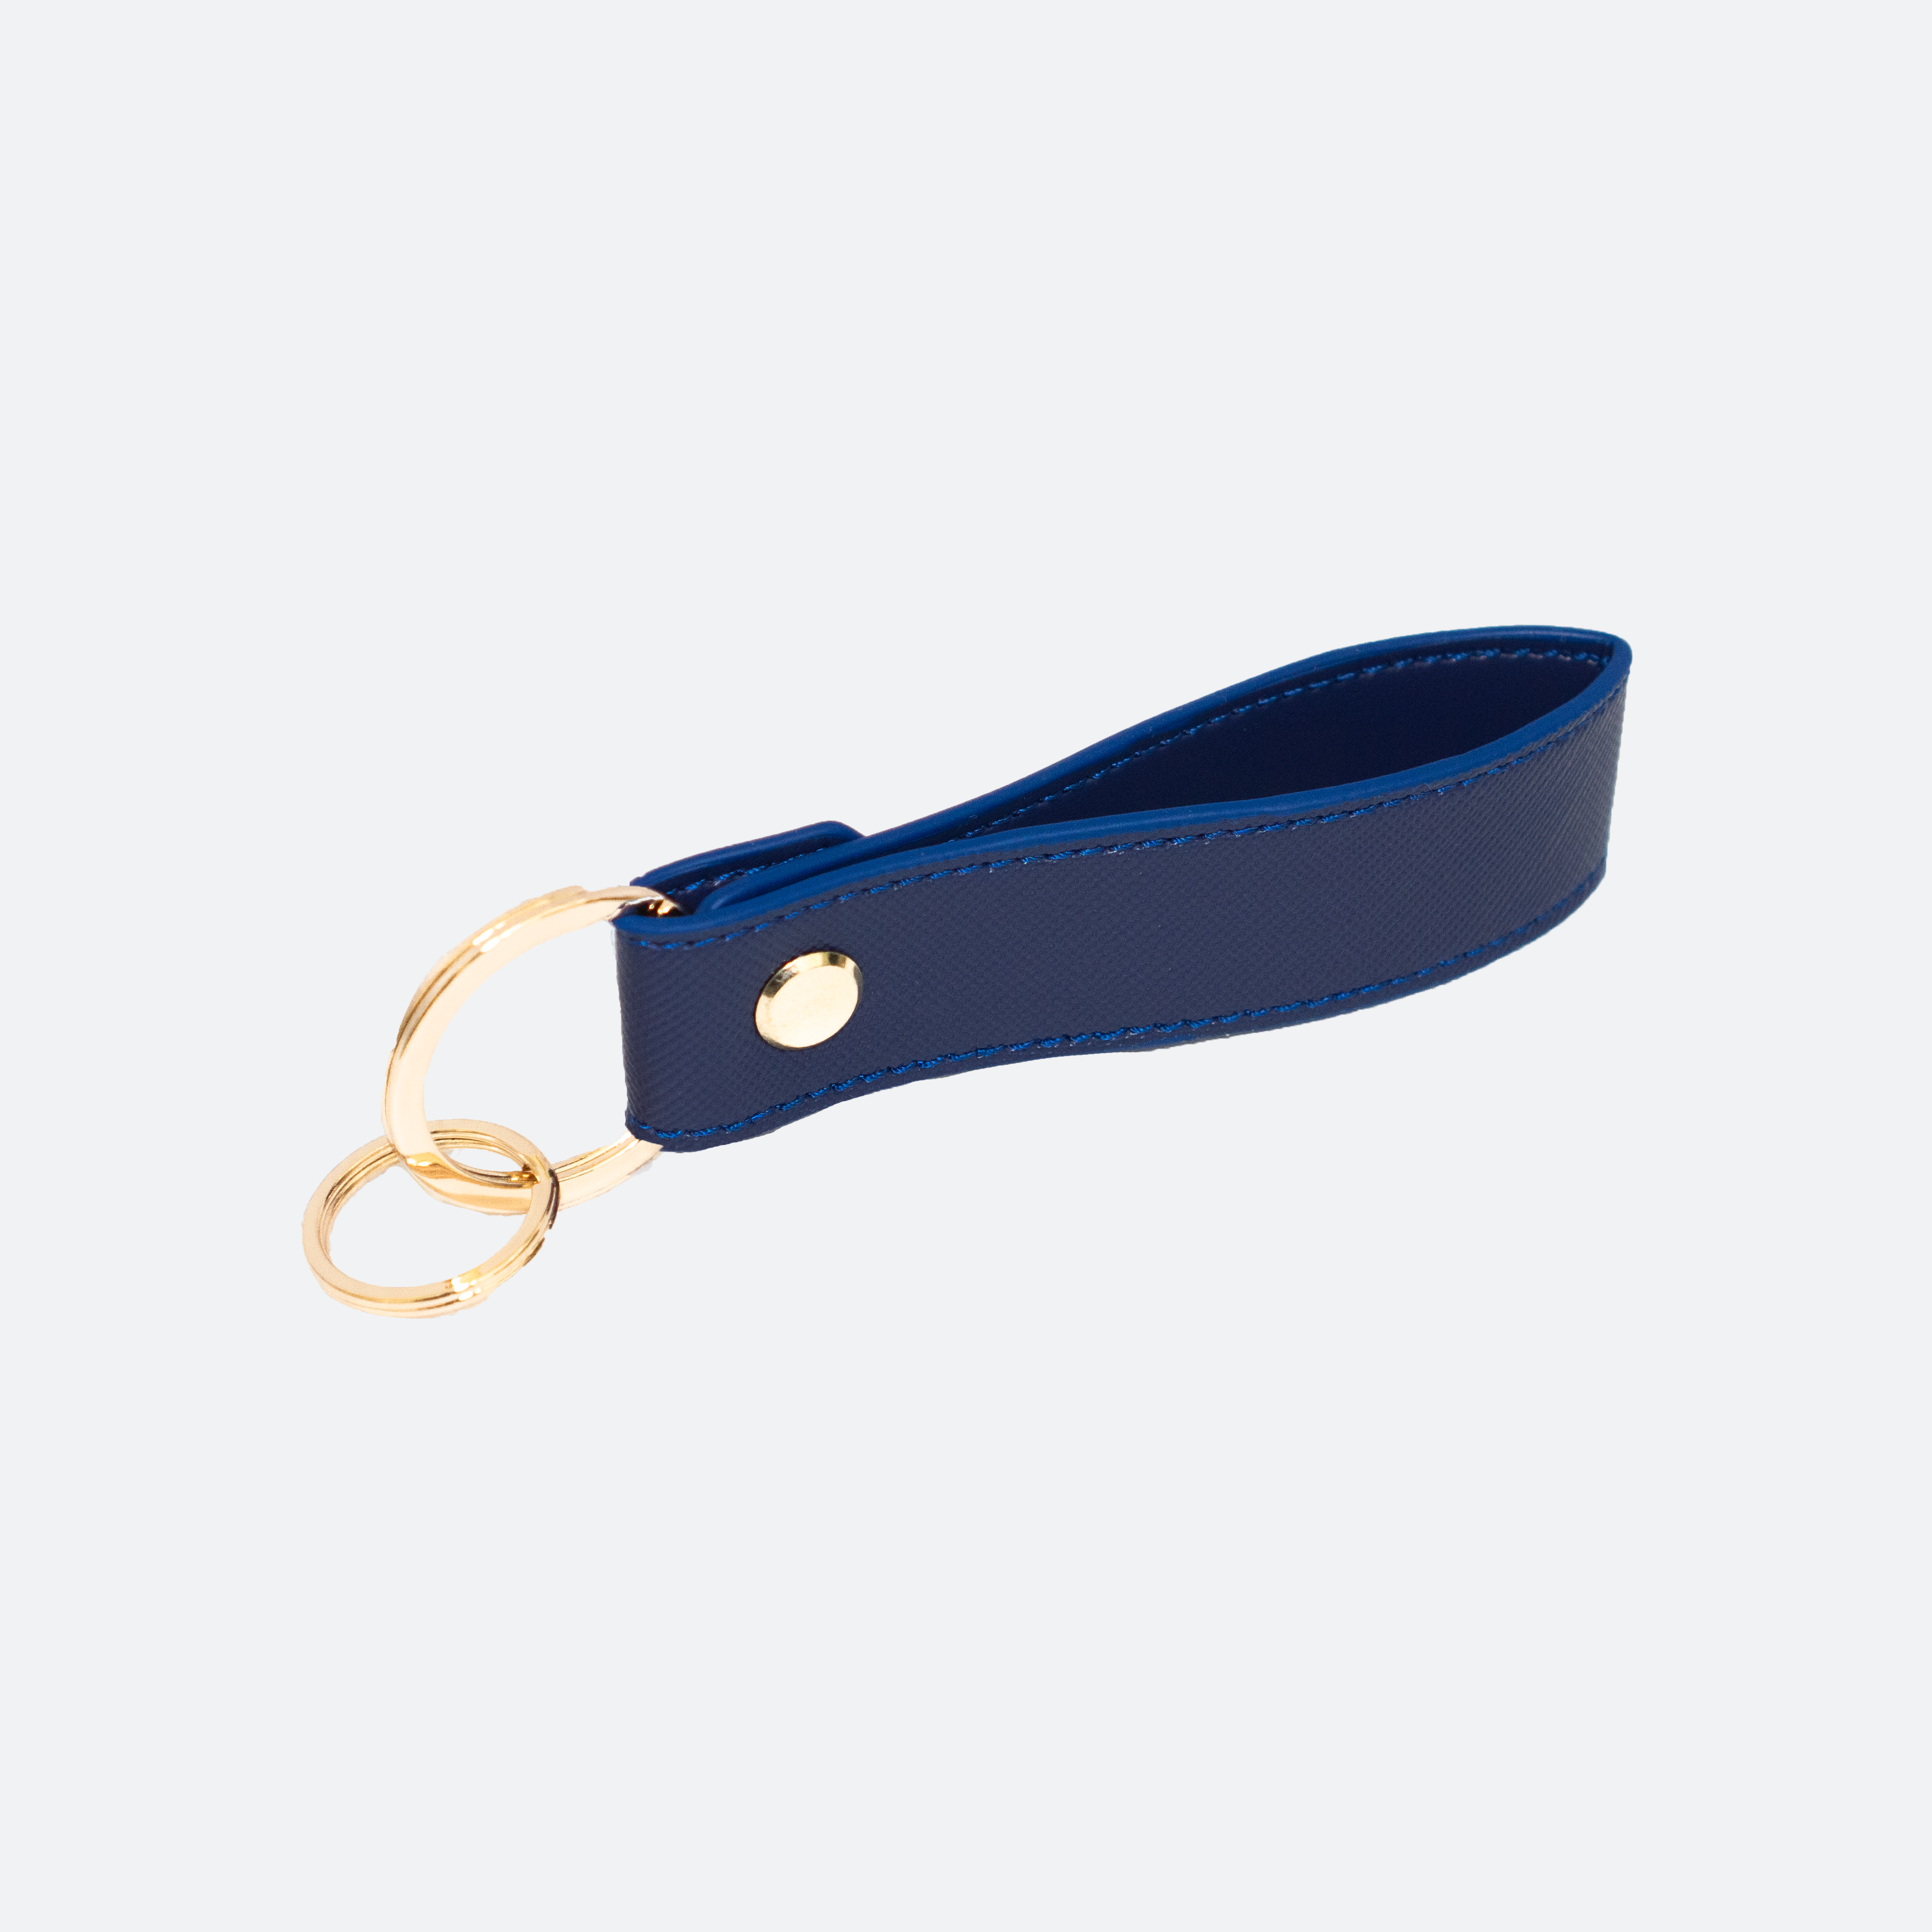 Emerson Saffiano Leather Keychain in Oxford Blue - Kastemize